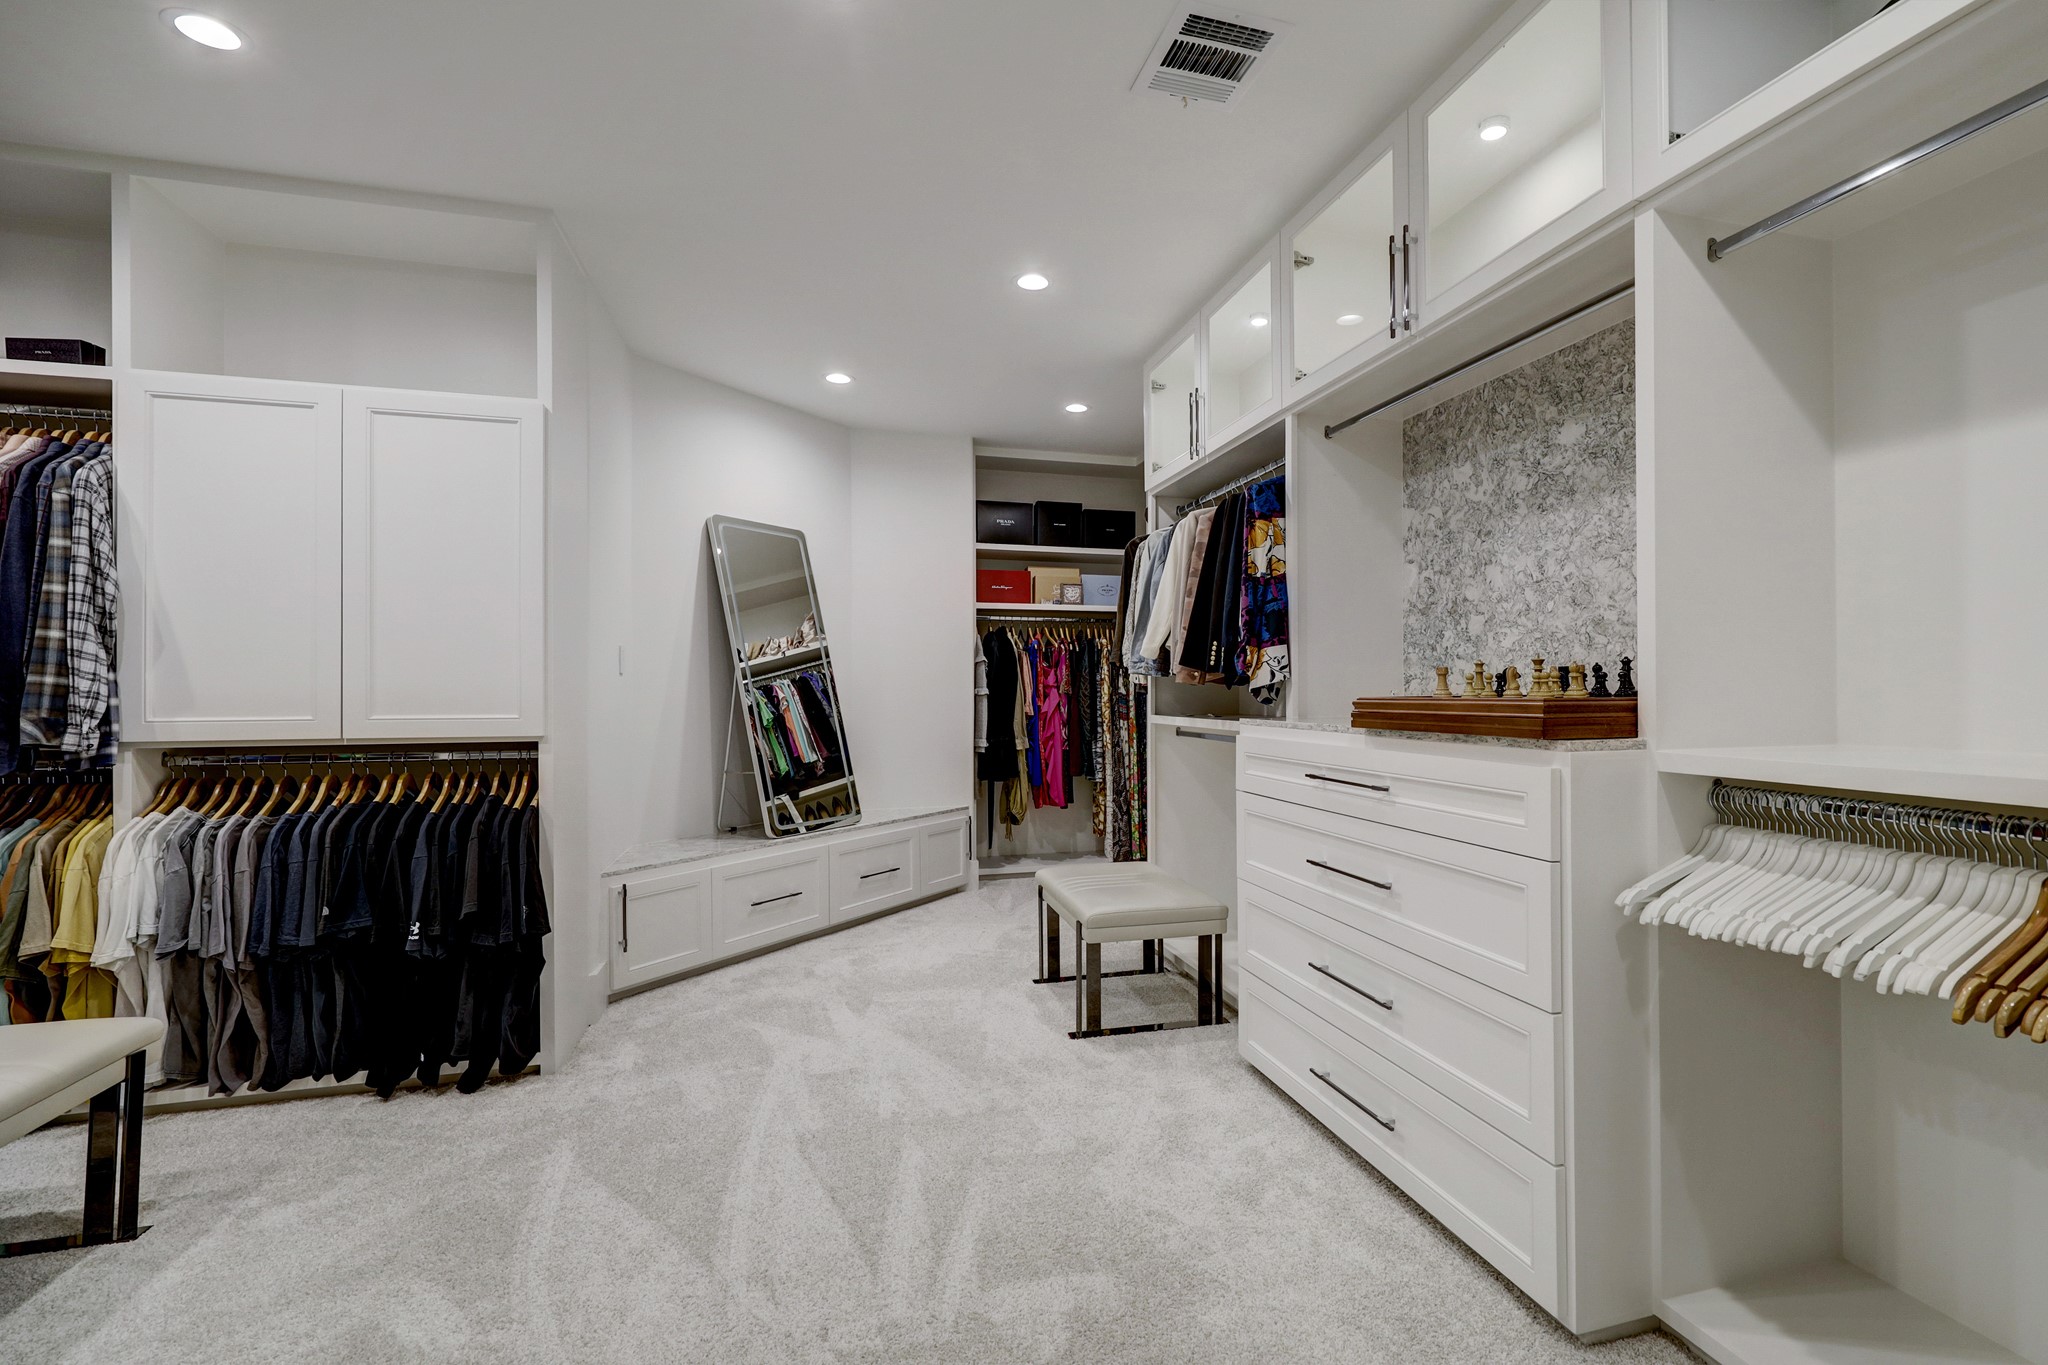 Well appointed closet with custom built ins, glass front cabinets and generous space for all your attire and more.